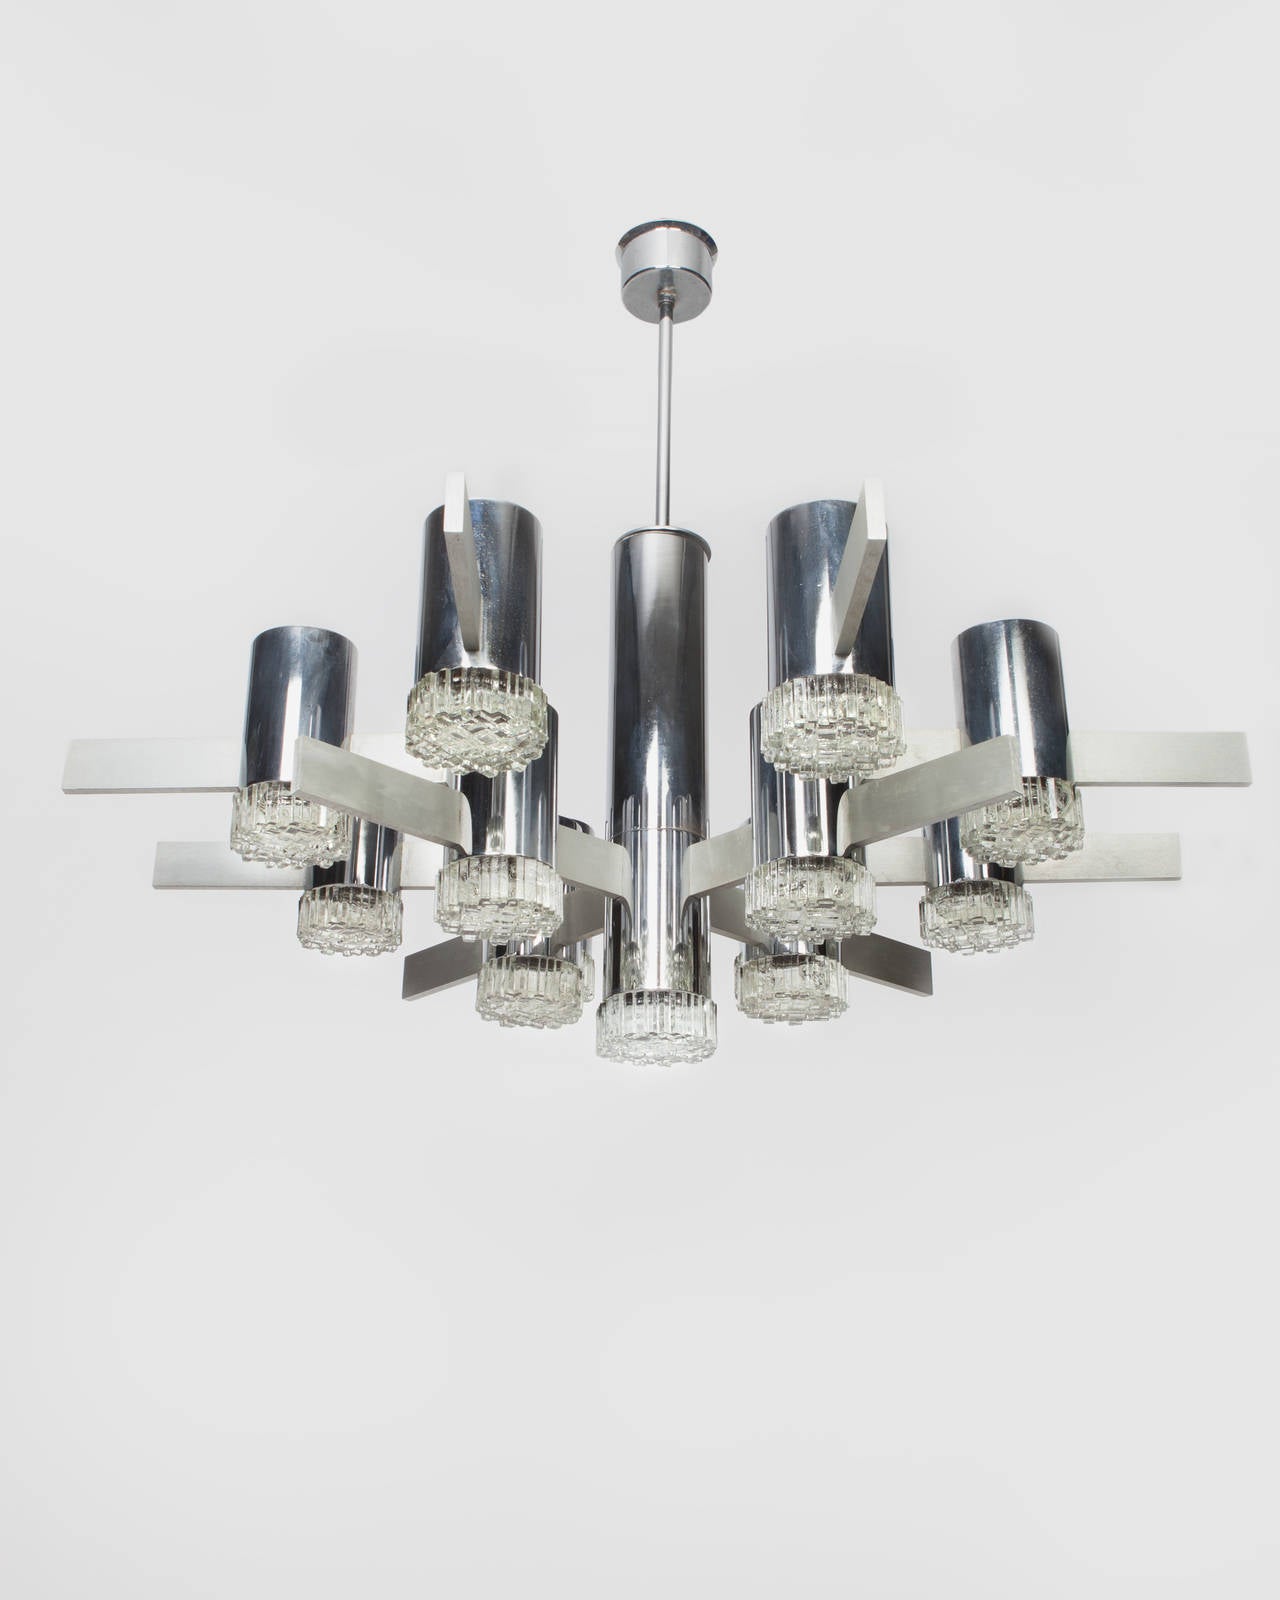 AHL3921

A vintage thirteen-light polished chrome and brushed aluminum chandelier with textured glass diffusers. This sculptural mid-century modern fixture was designed by the Italian maker Gaetano Sciolari in the 1960s. Due to the antique nature